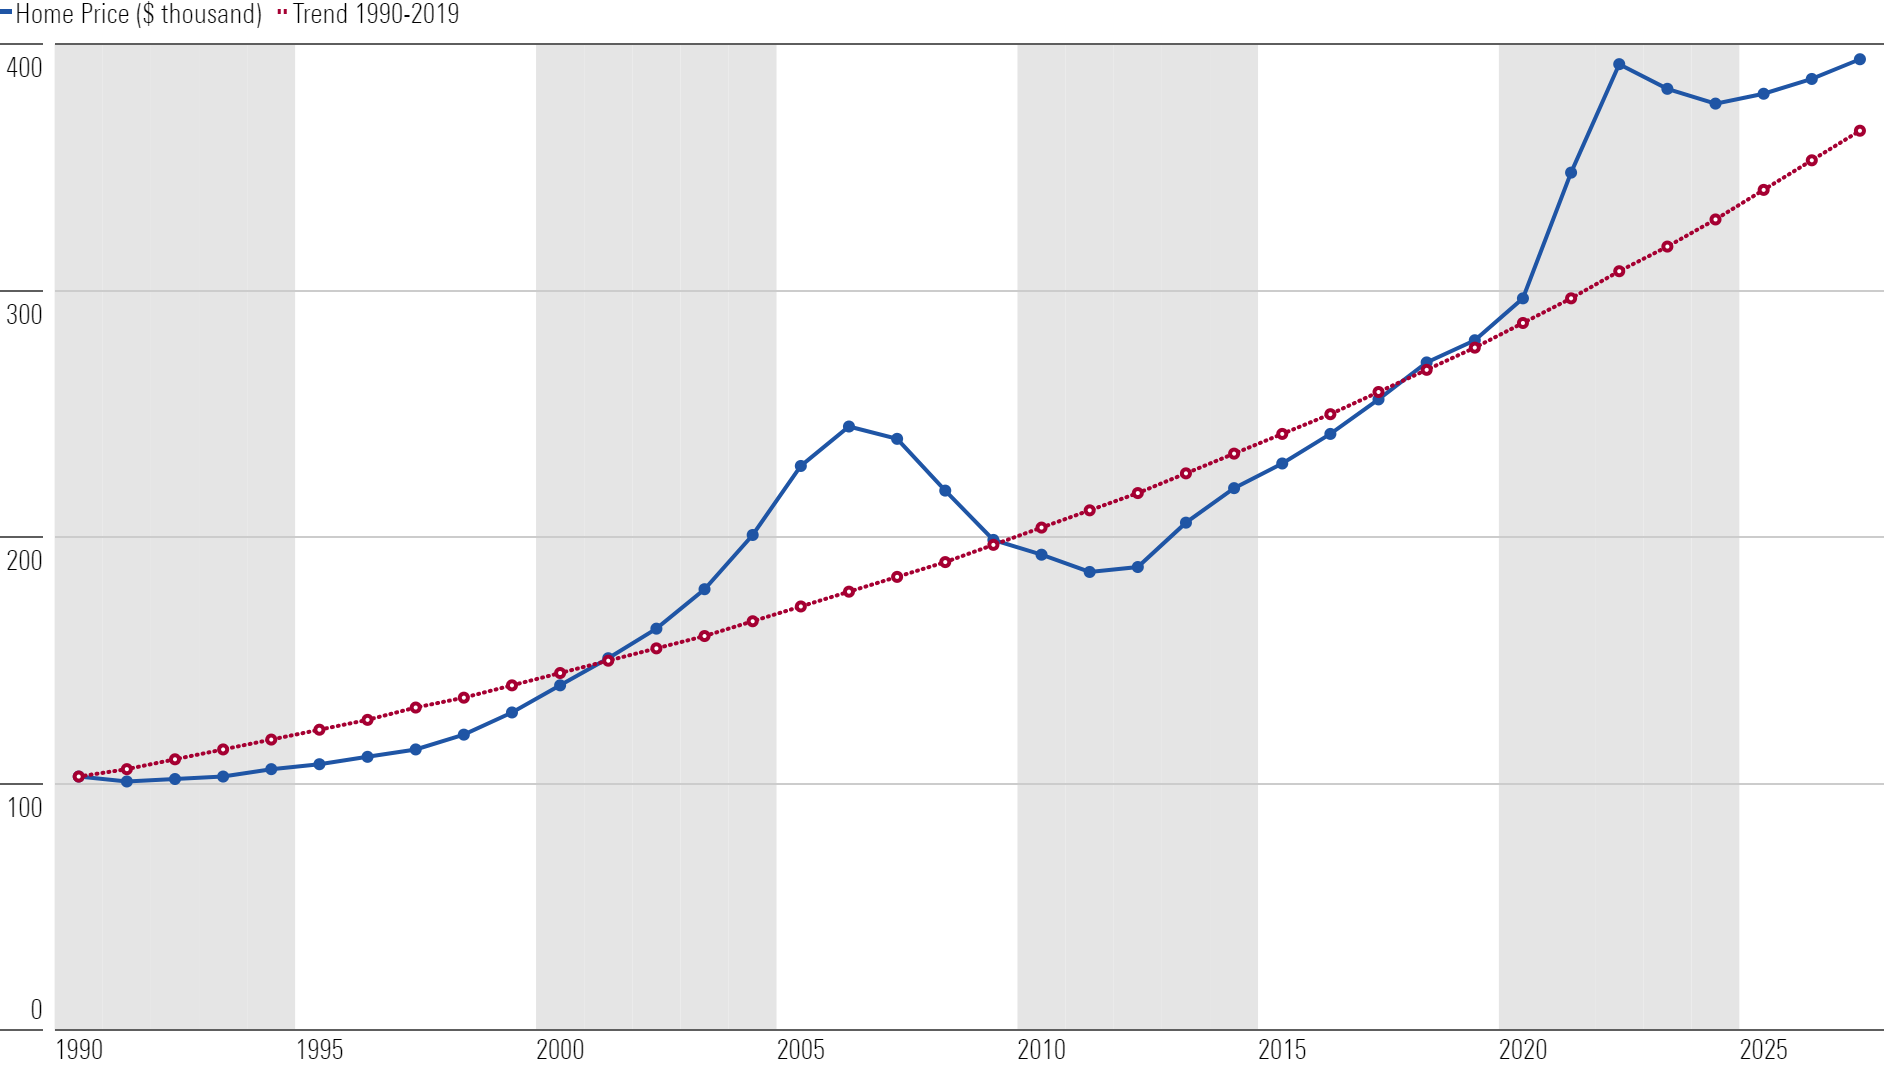 Line chart showing median home price historically, along with prepandemic trend compared to Morningstar's forecasts.